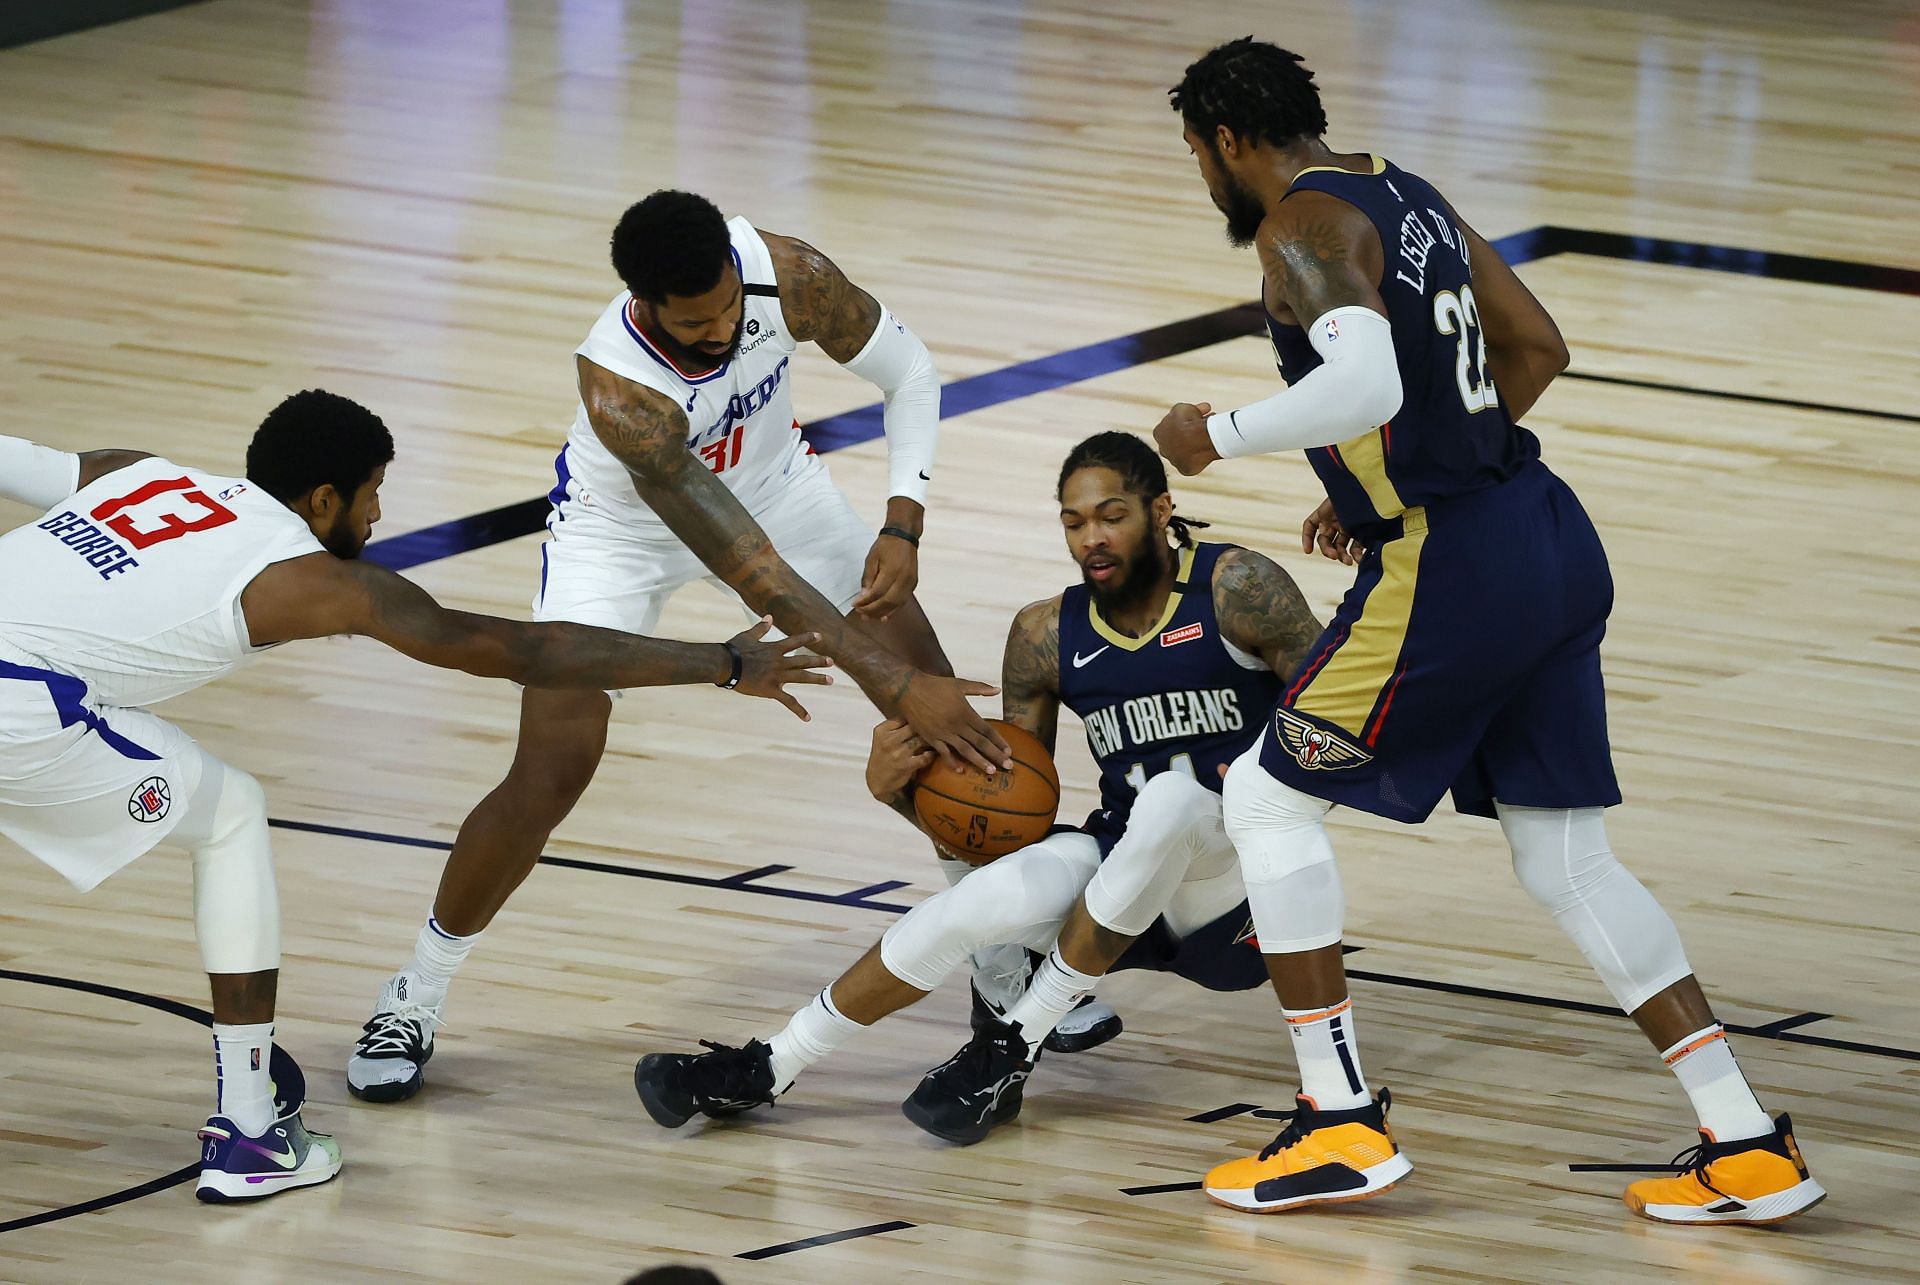 The LA Clippers will lock horns with the New Orleans Pelicans on Friday.